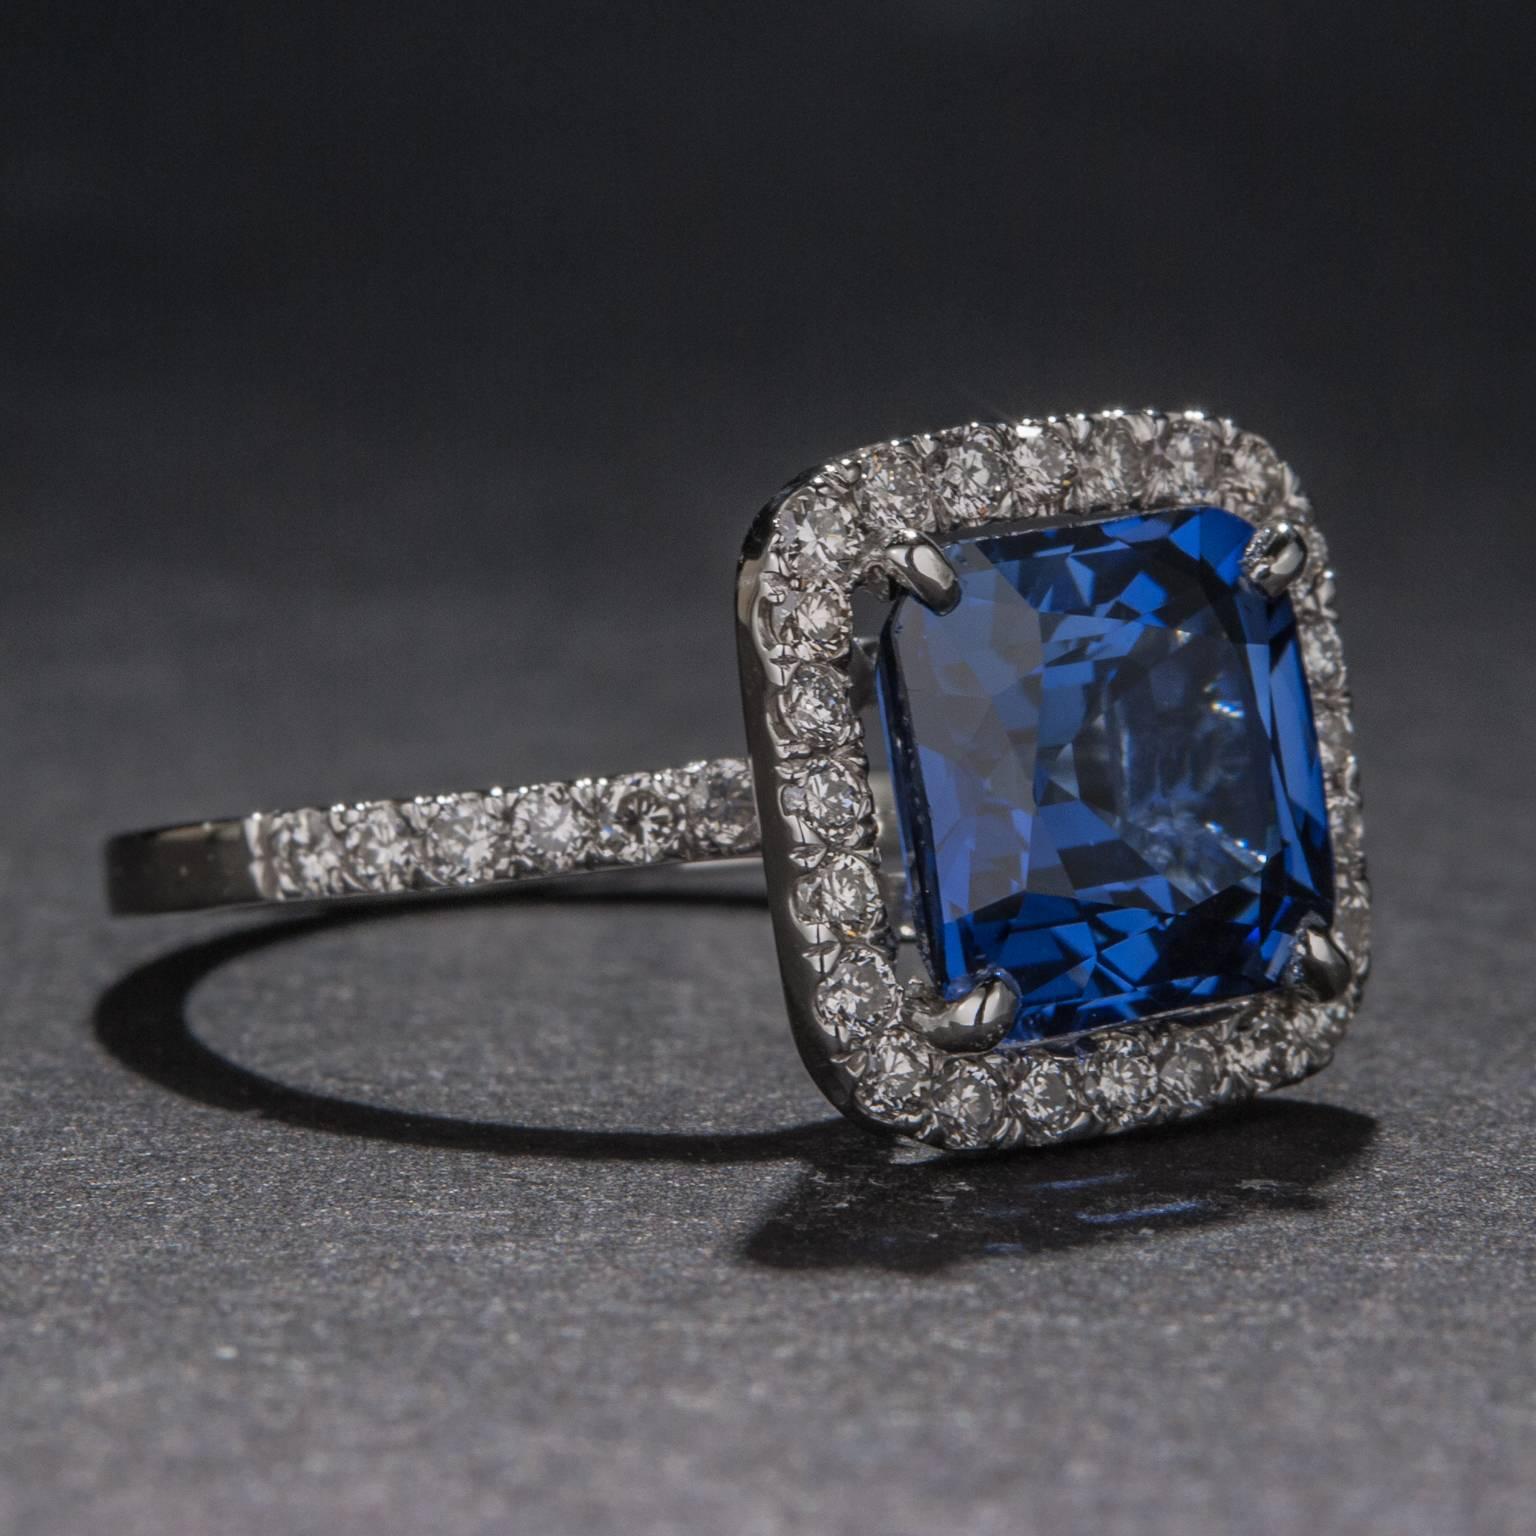 An absolutely stunning 14k white gold ring featuring a 4.28 carat center sapphire surrounded by .65 total carats of diamonds. This ring is currently size 6.5 but it may be sized to fit.
